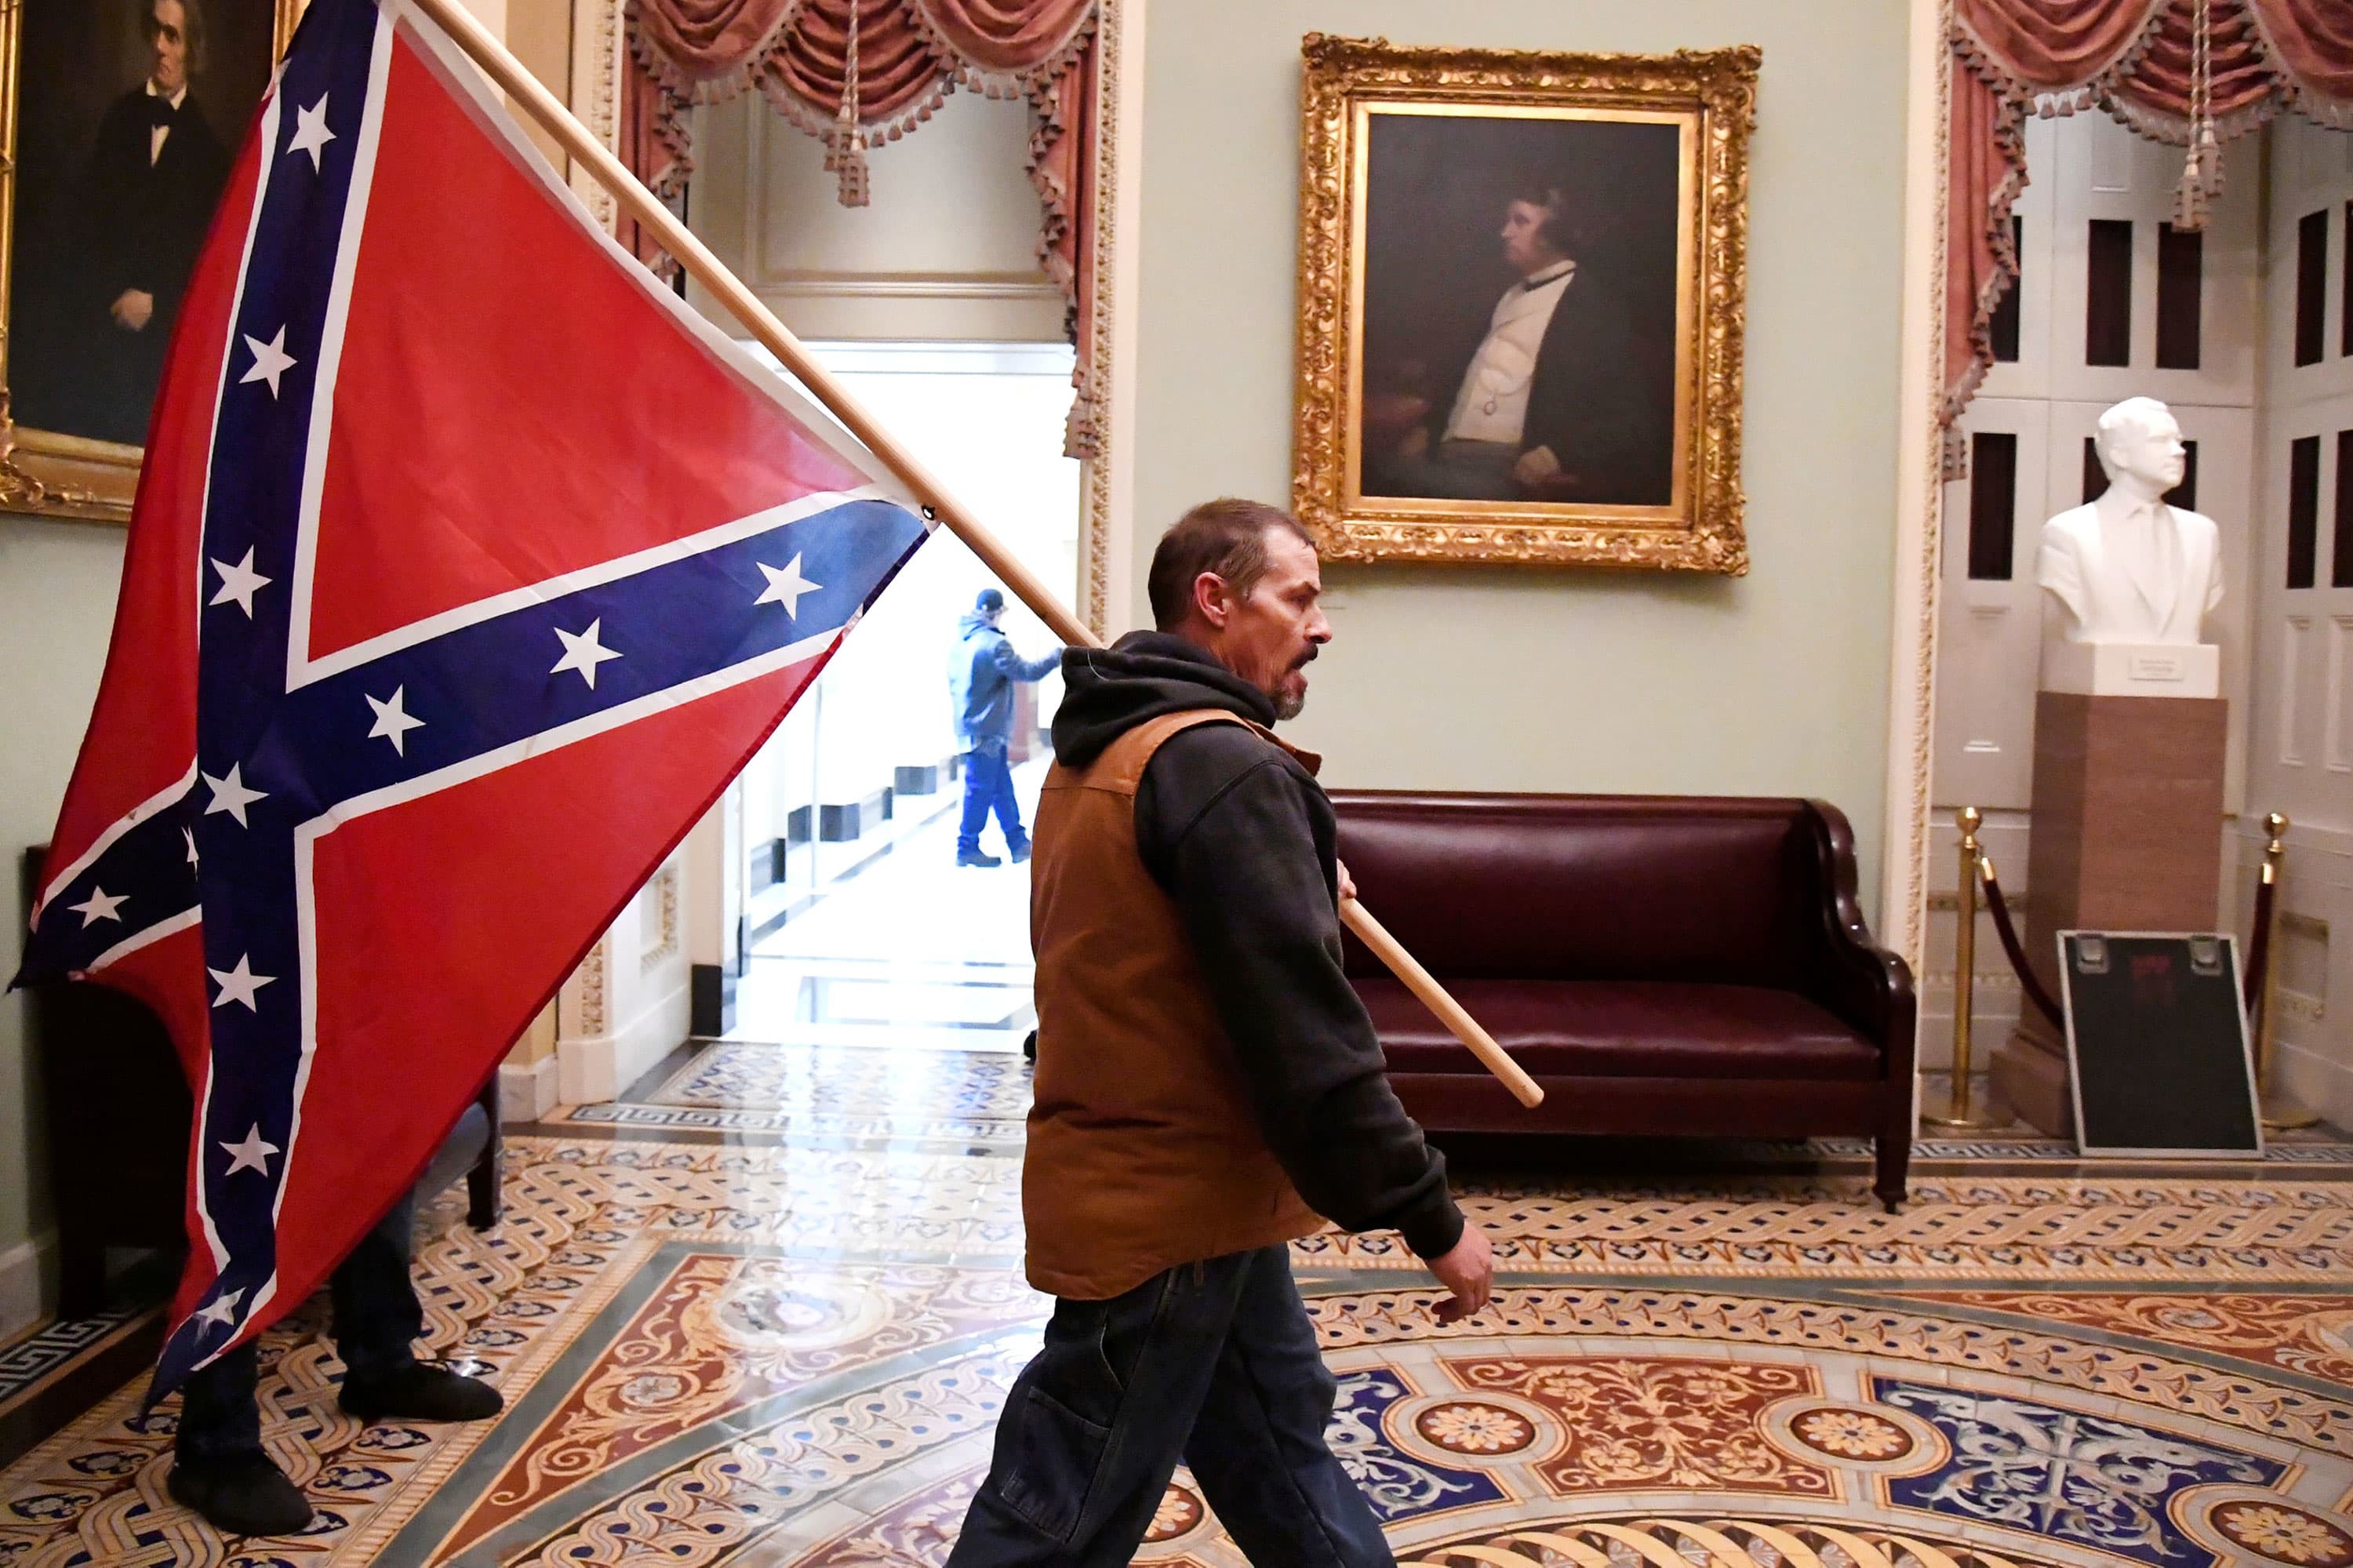 Kevin Seefried Who Carried Confederate Flag Into The Capitol Arrested